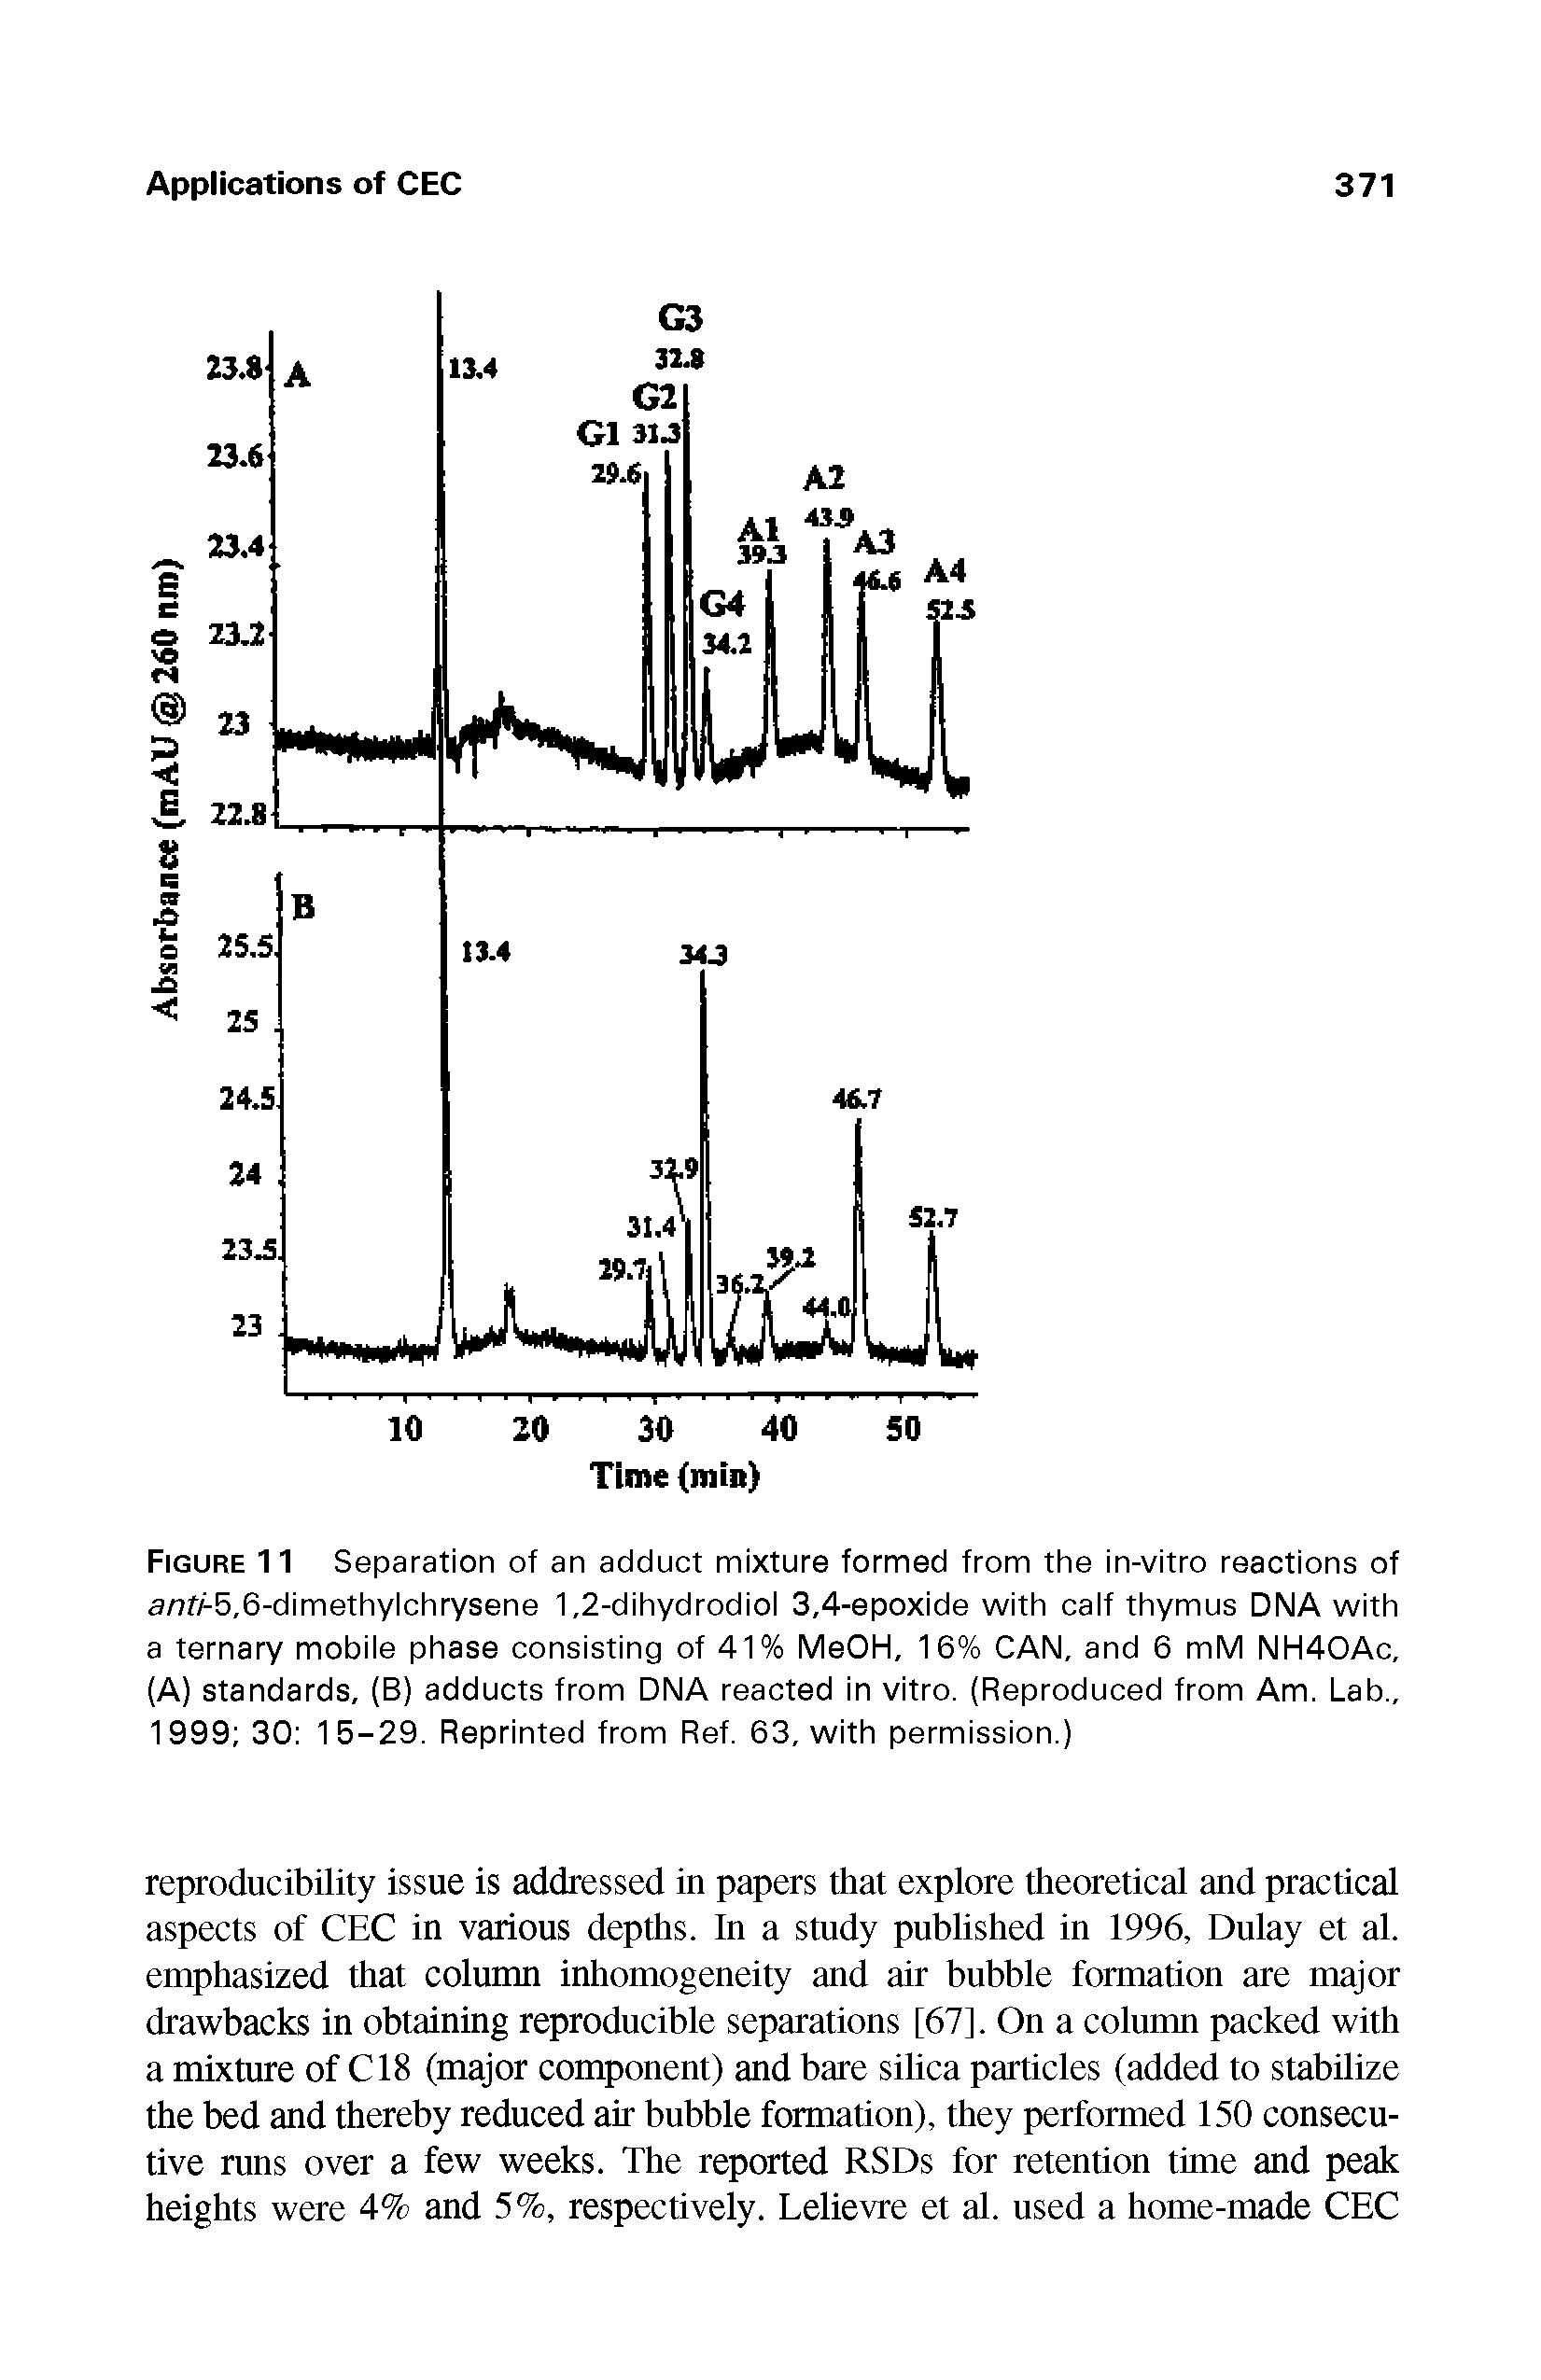 Figure 11 Separation of an adduct mixture formed from the in-vitro reactions of a/7f/-5,6-dimethylchrysene 1,2-dihydrodiol 3,4-epoxide with calf thymus DNA with a ternary mobile phase consisting of 41% MeOH, 16% CAN, and 6 mM NH40Ac, (A) standards, (B) adducts from DNA reacted in vitro. (Reproduced from Am. Lab., 1999 30 15-29. Reprinted from Ref. 63, with permission.)...